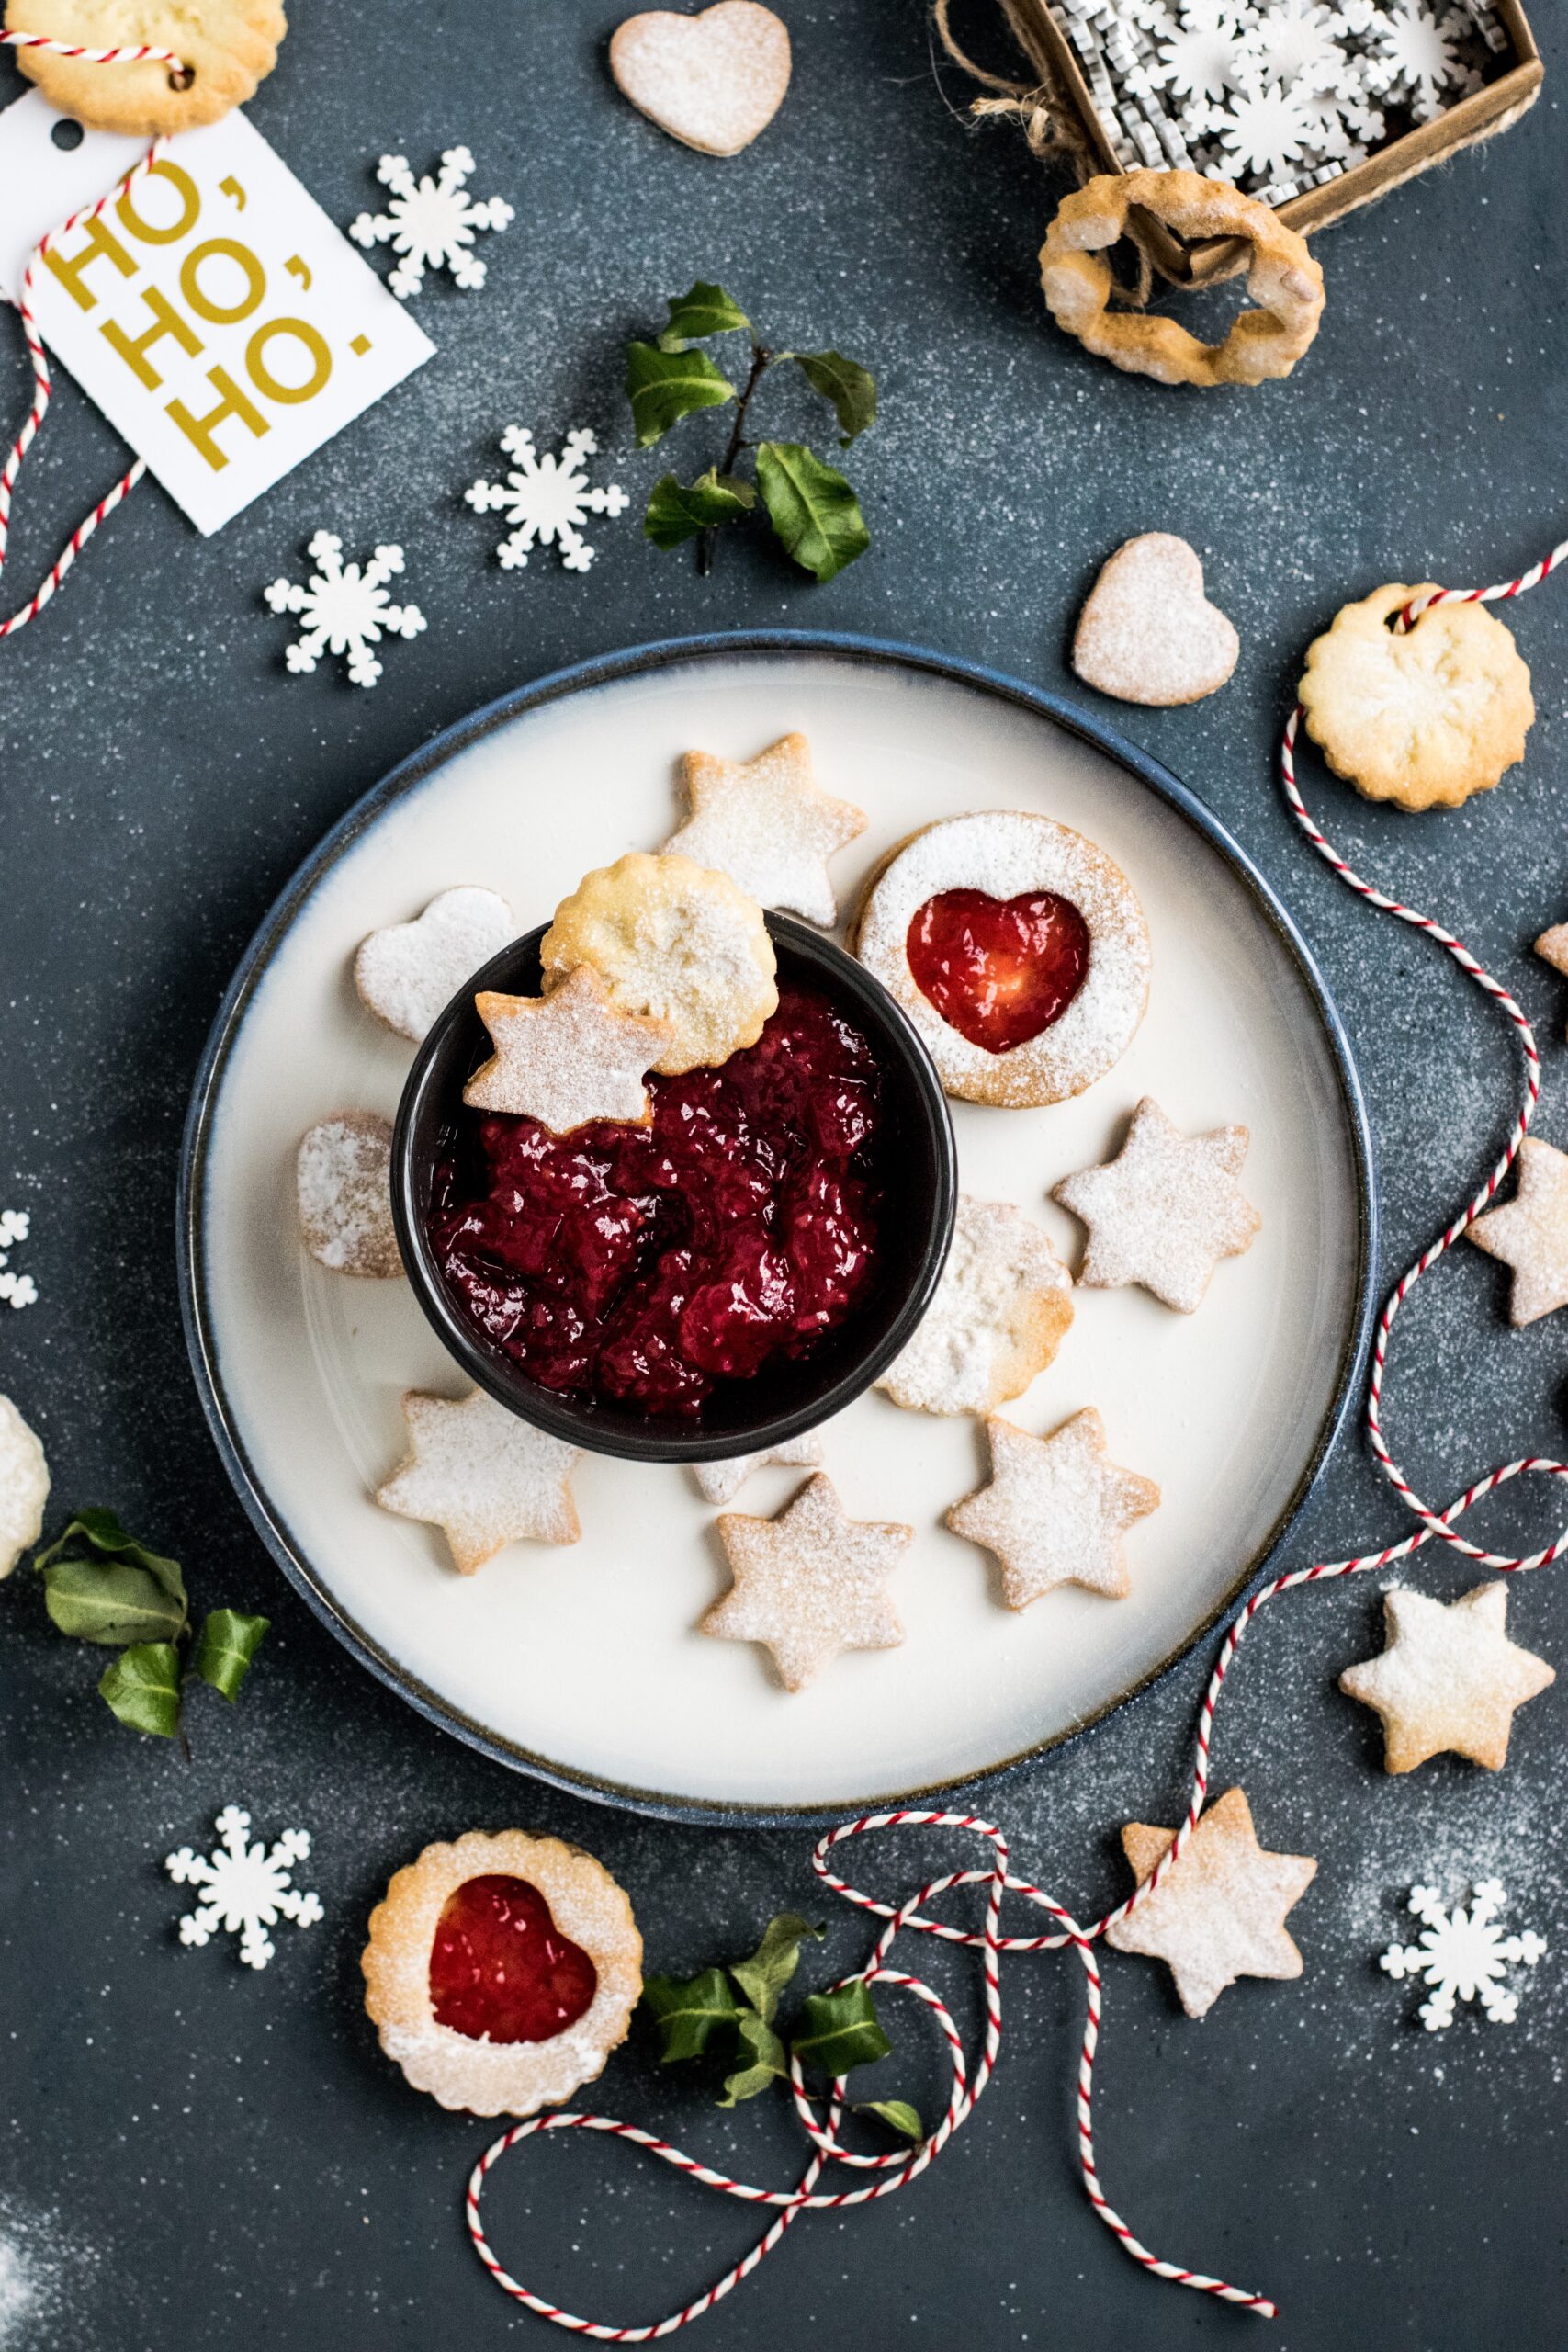 Arial view of a white plate with cookies and red dip. There are festive holiday decorations all around the plate of cookies.